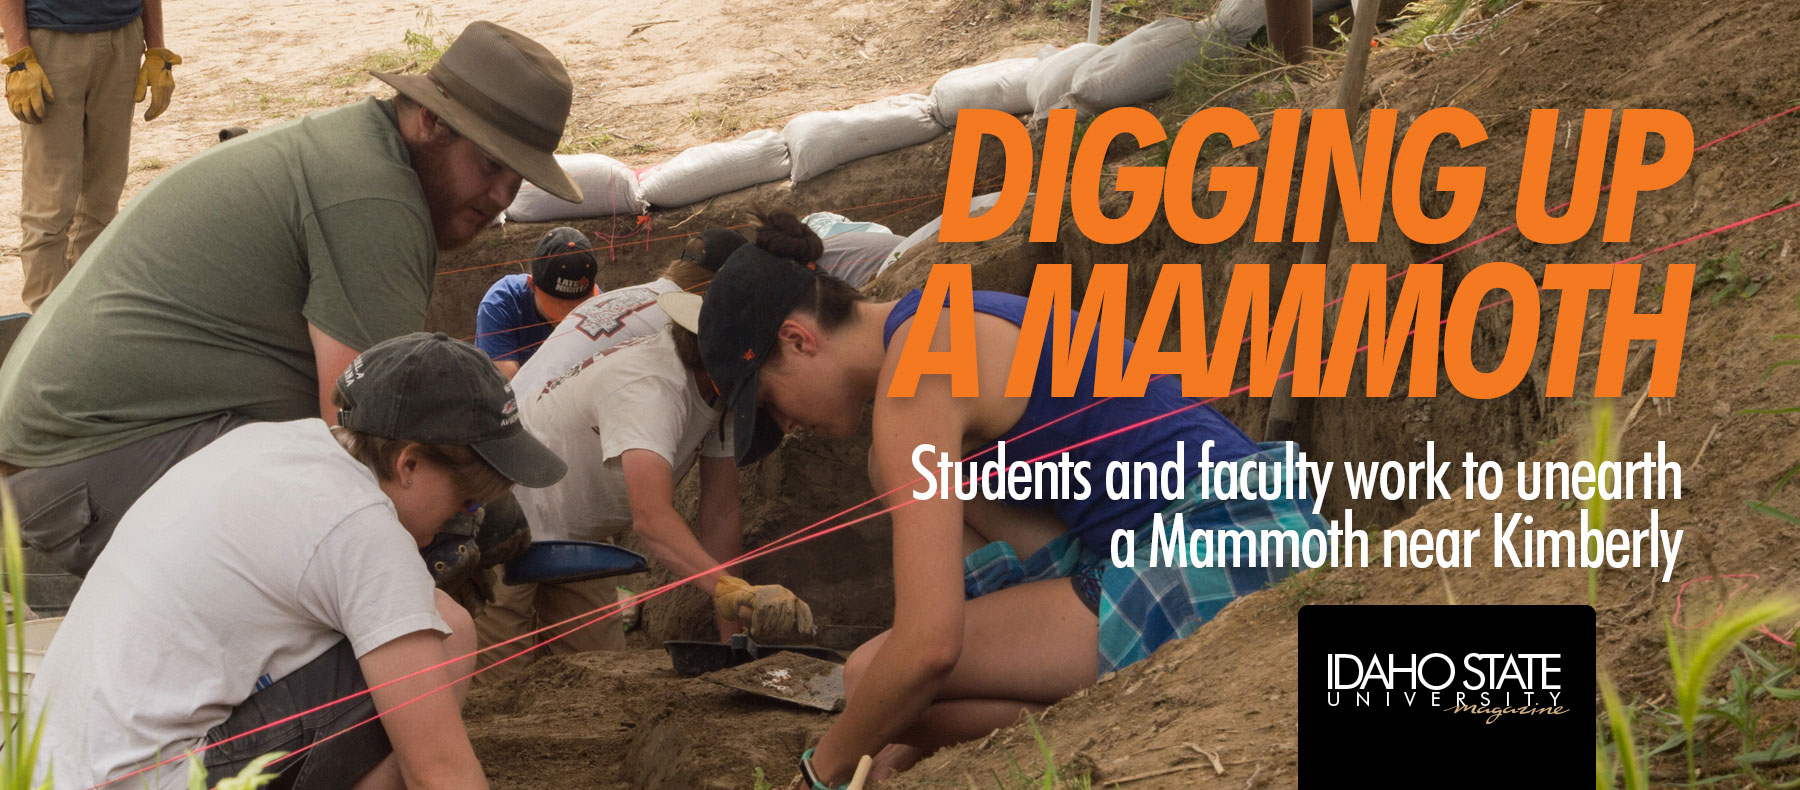 Digging up a mammoth. Students and faculty work to unearth a mammoth near Kimberly.